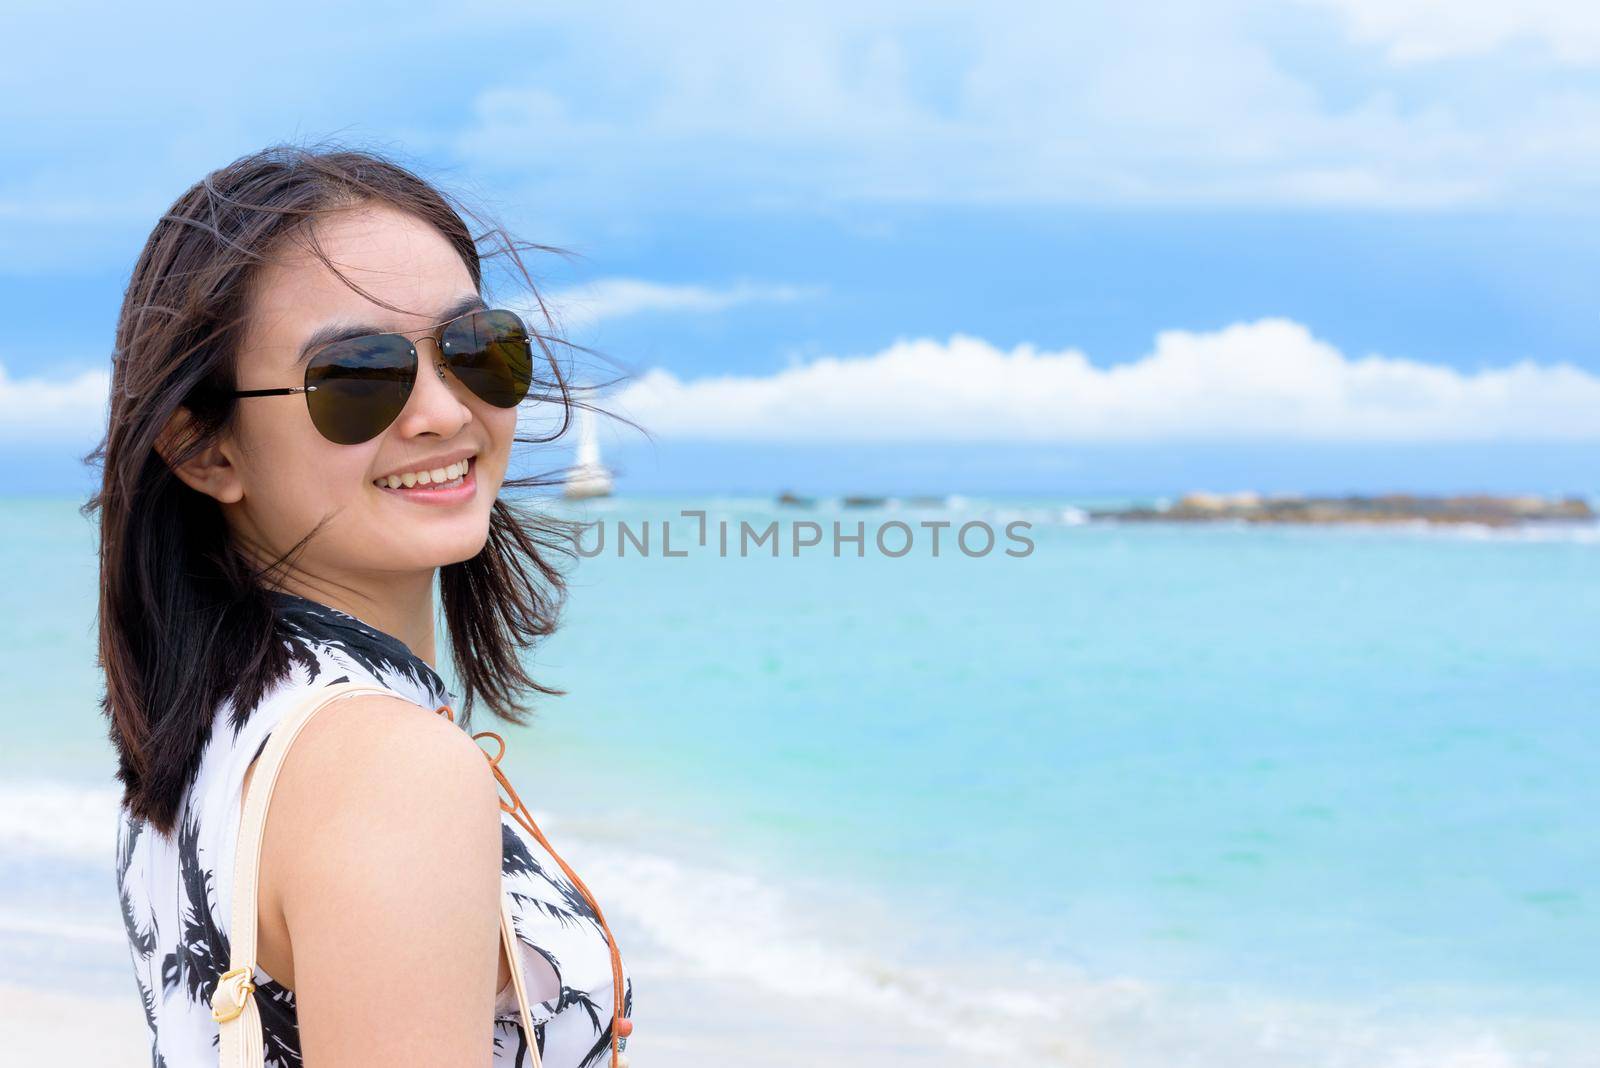 Beautiful woman tourist wearing sunglasse looking at the camera and smiling with happy on the beach and sea in summer sky background at Koh Tarutao island, Satun, Thailand